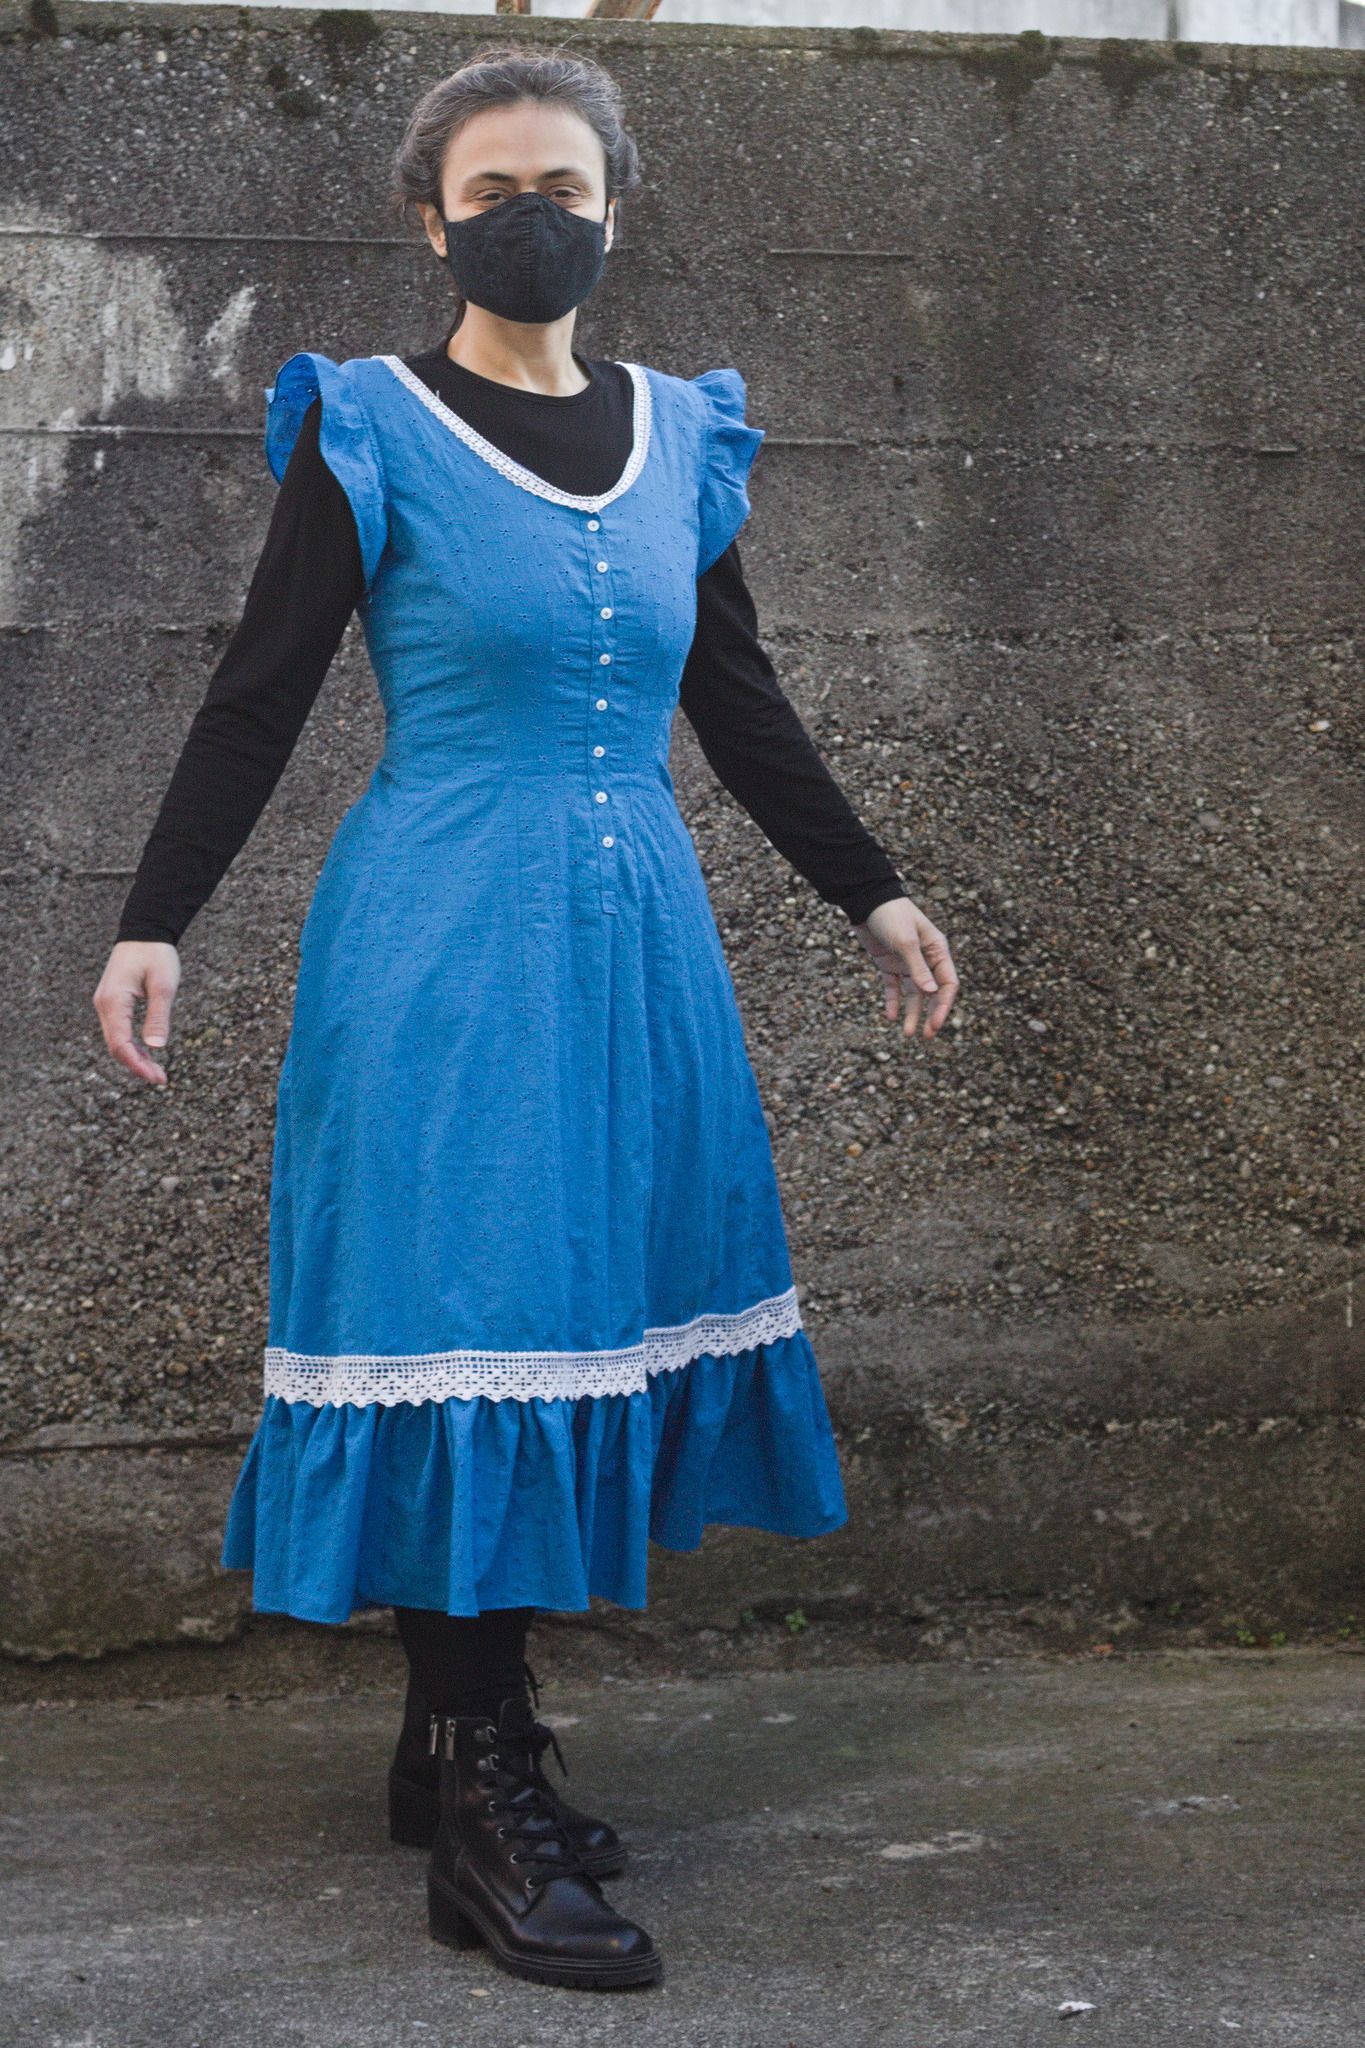 a person wearing a blue sleeveless fitted dress with
calf-length skirt; there are small ruffles on the armscyes and
the hem, and white lace on the collar and just above the hem
ruffle, and small white buttons on a partial placket down the
center front.